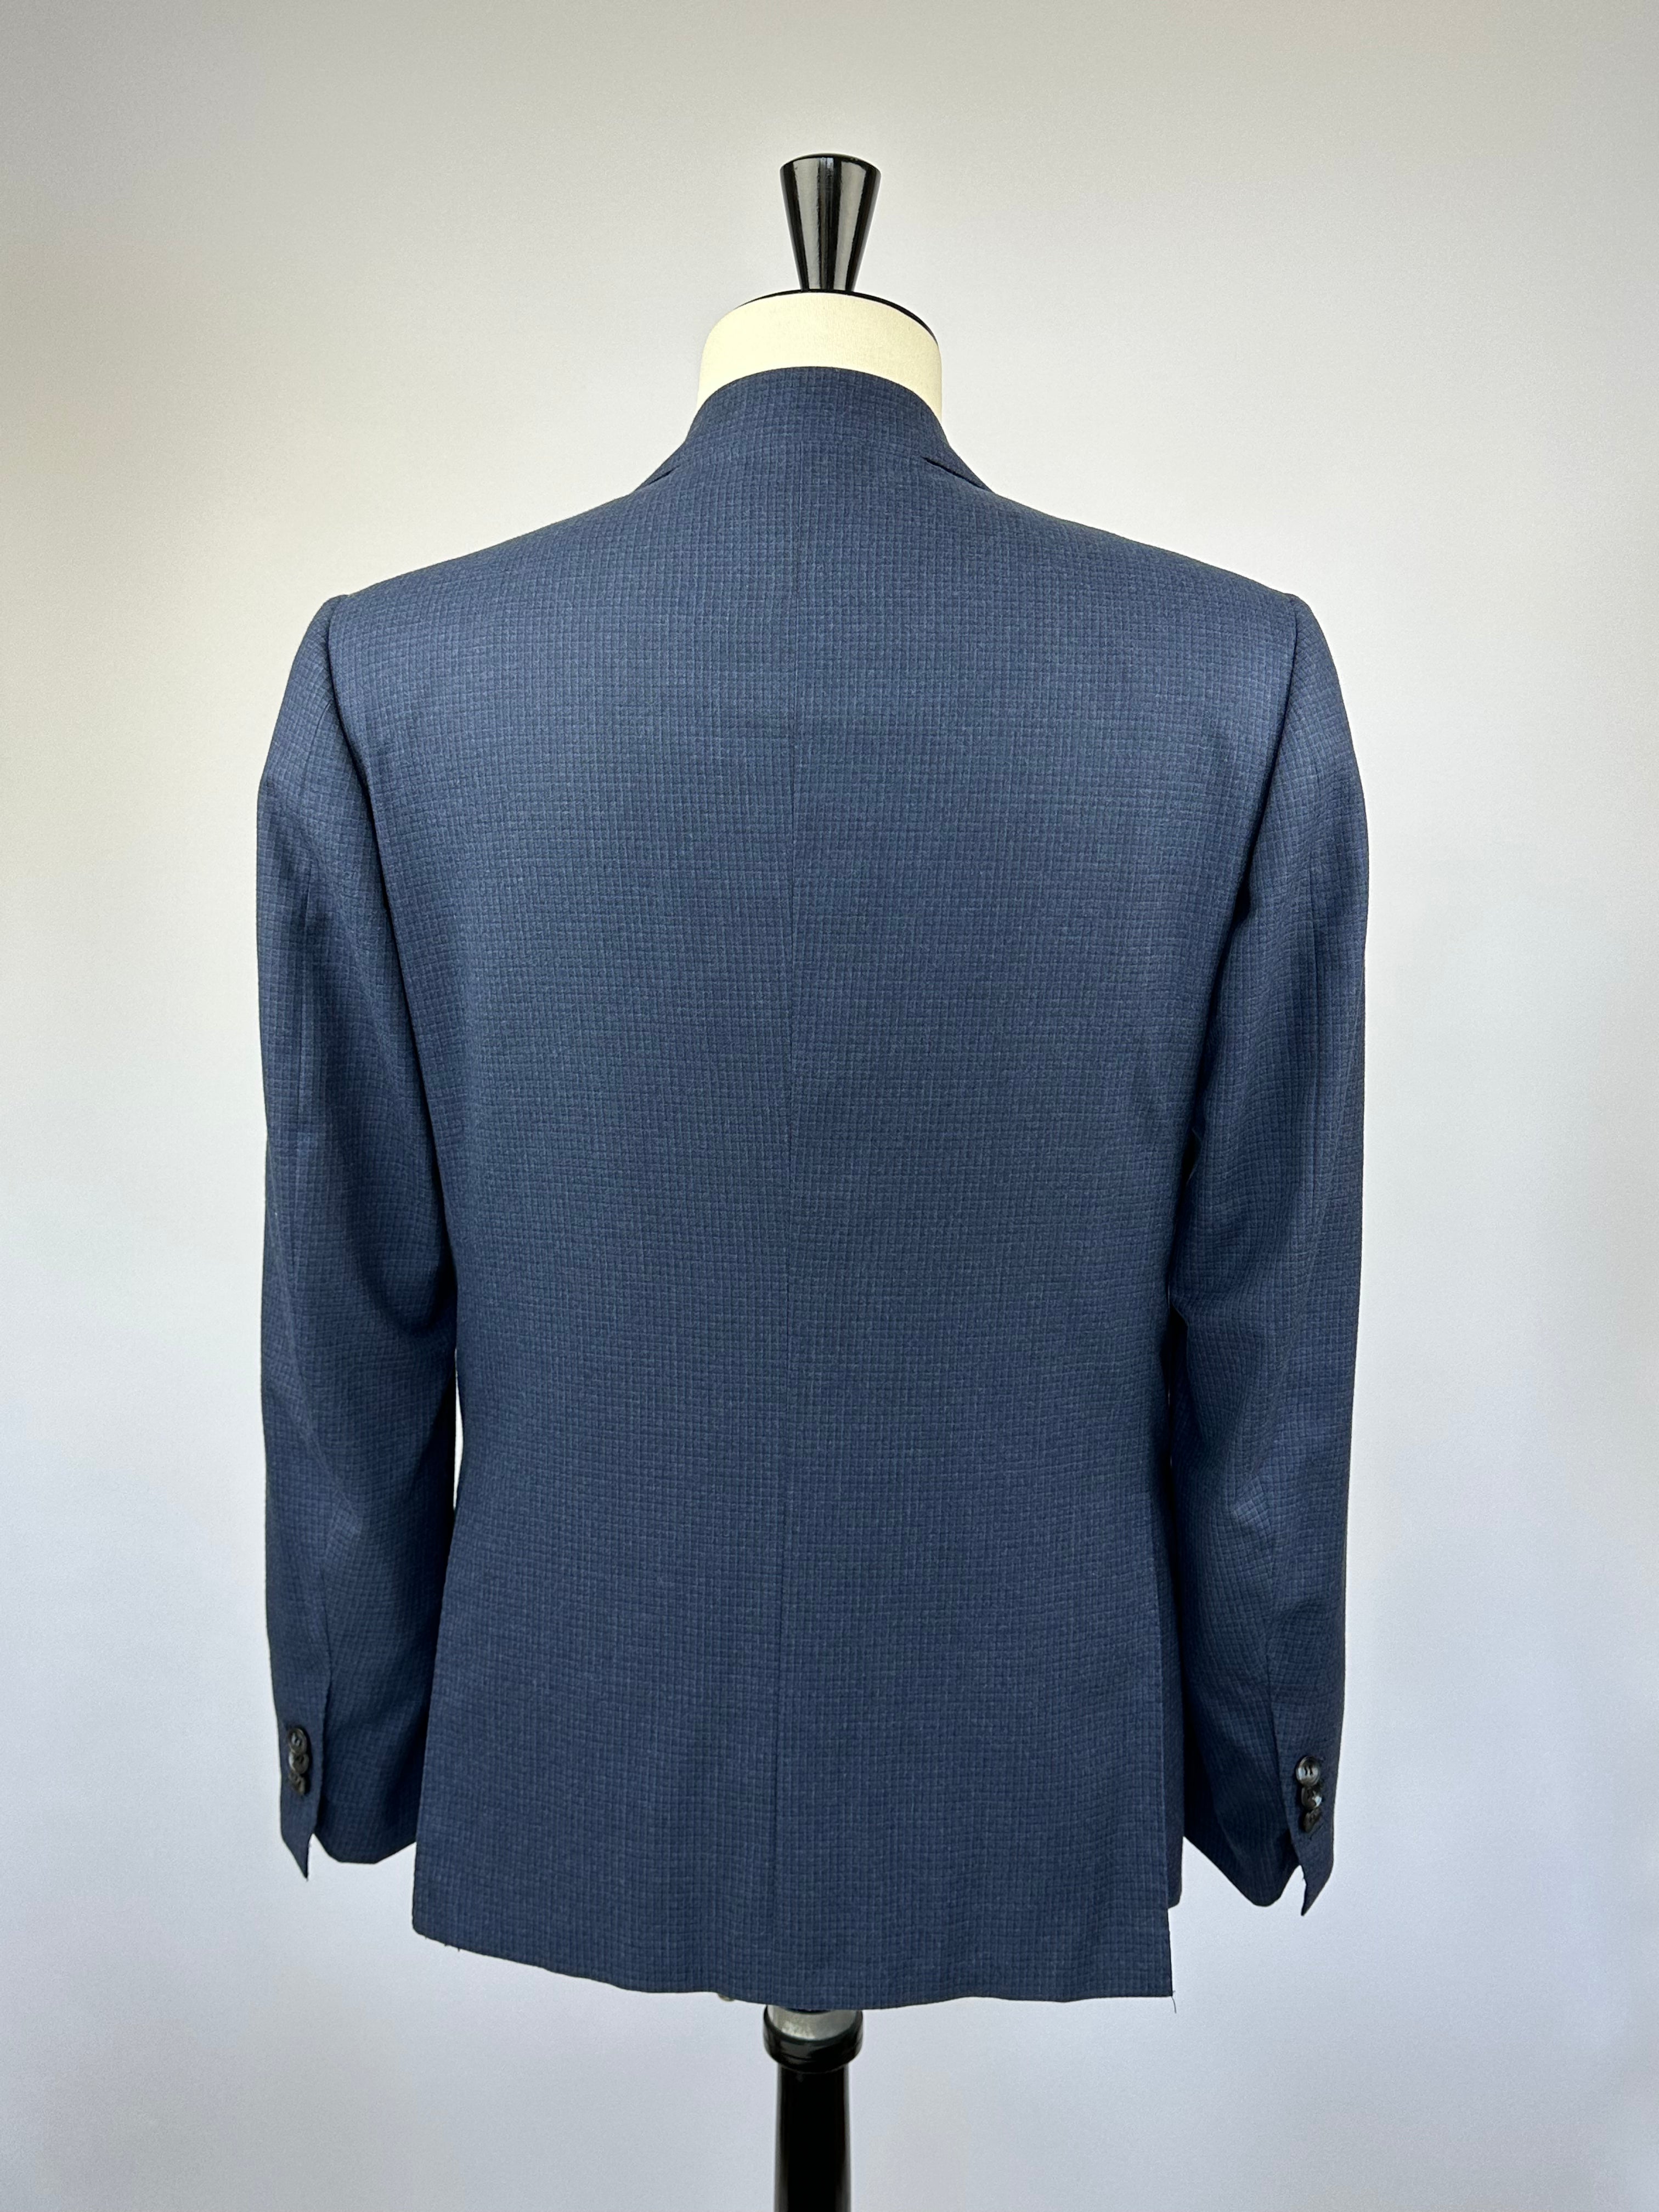 Kiton Blue Gingham Check Suit